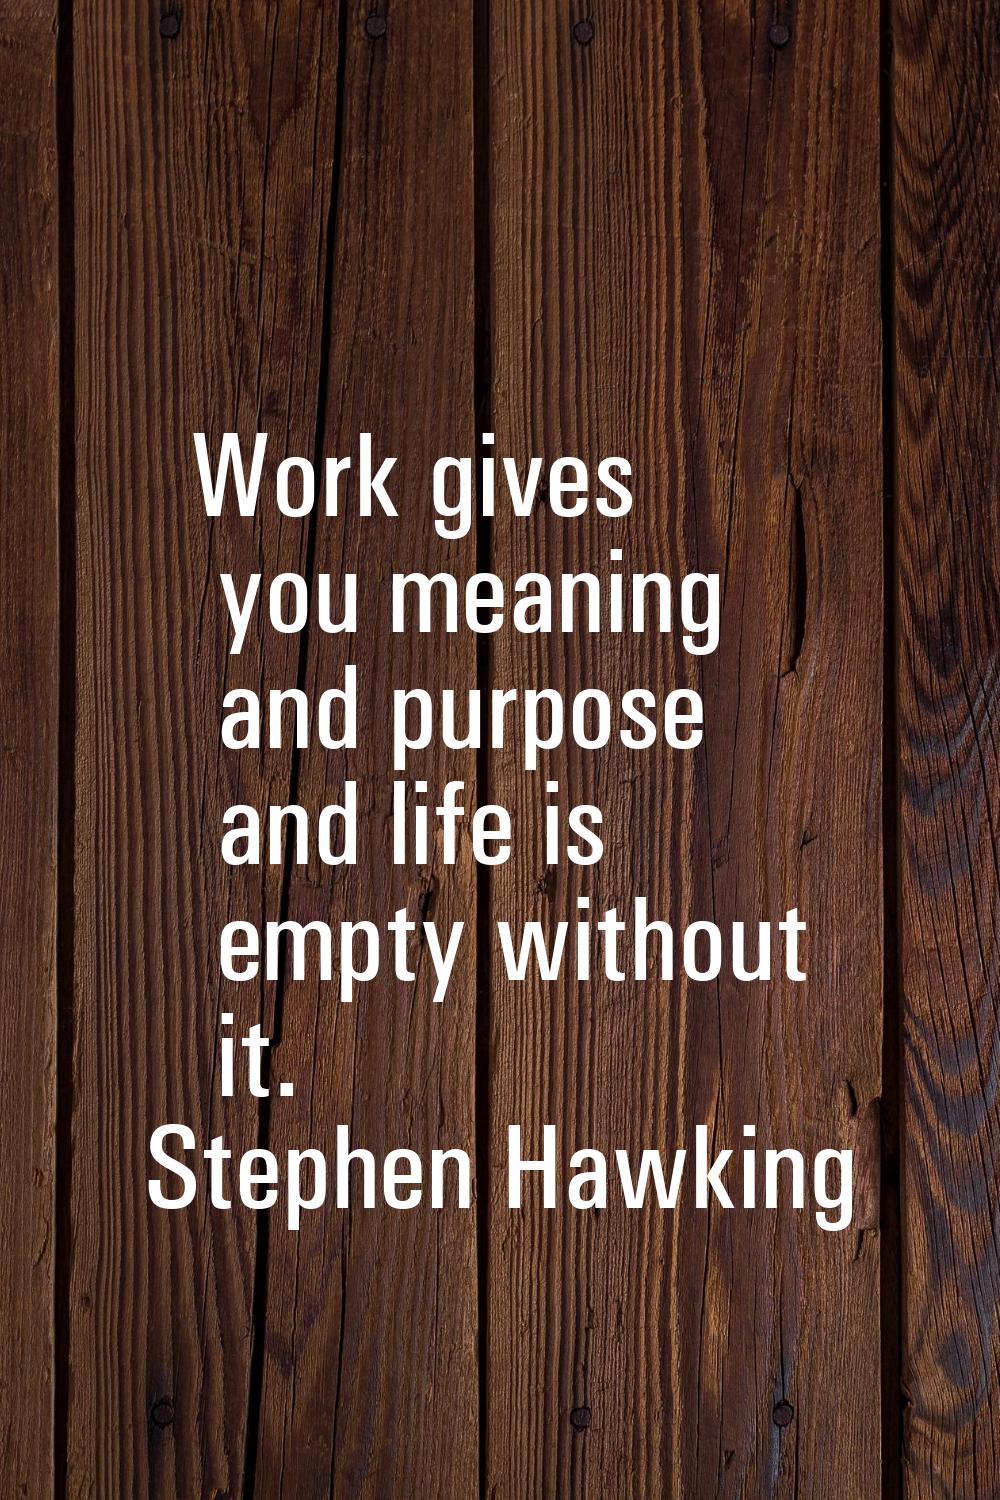 Work gives you meaning and purpose and life is empty without it.